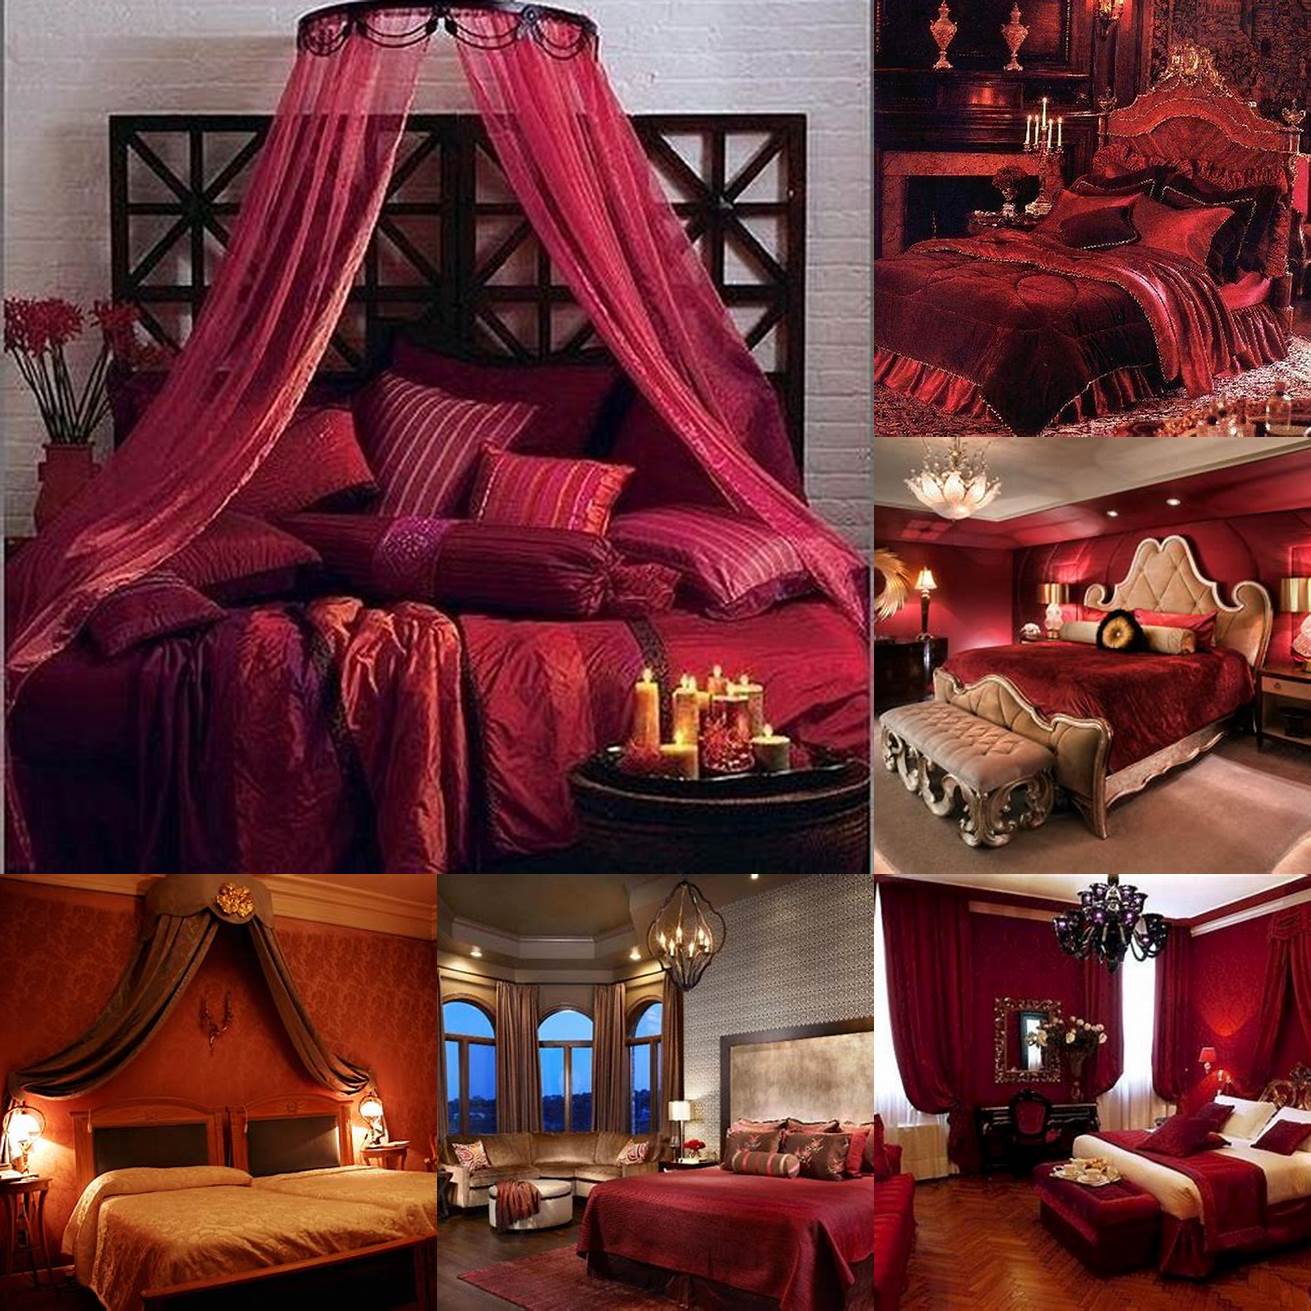 A deep red bedroom can create a romantic and intimate atmosphere